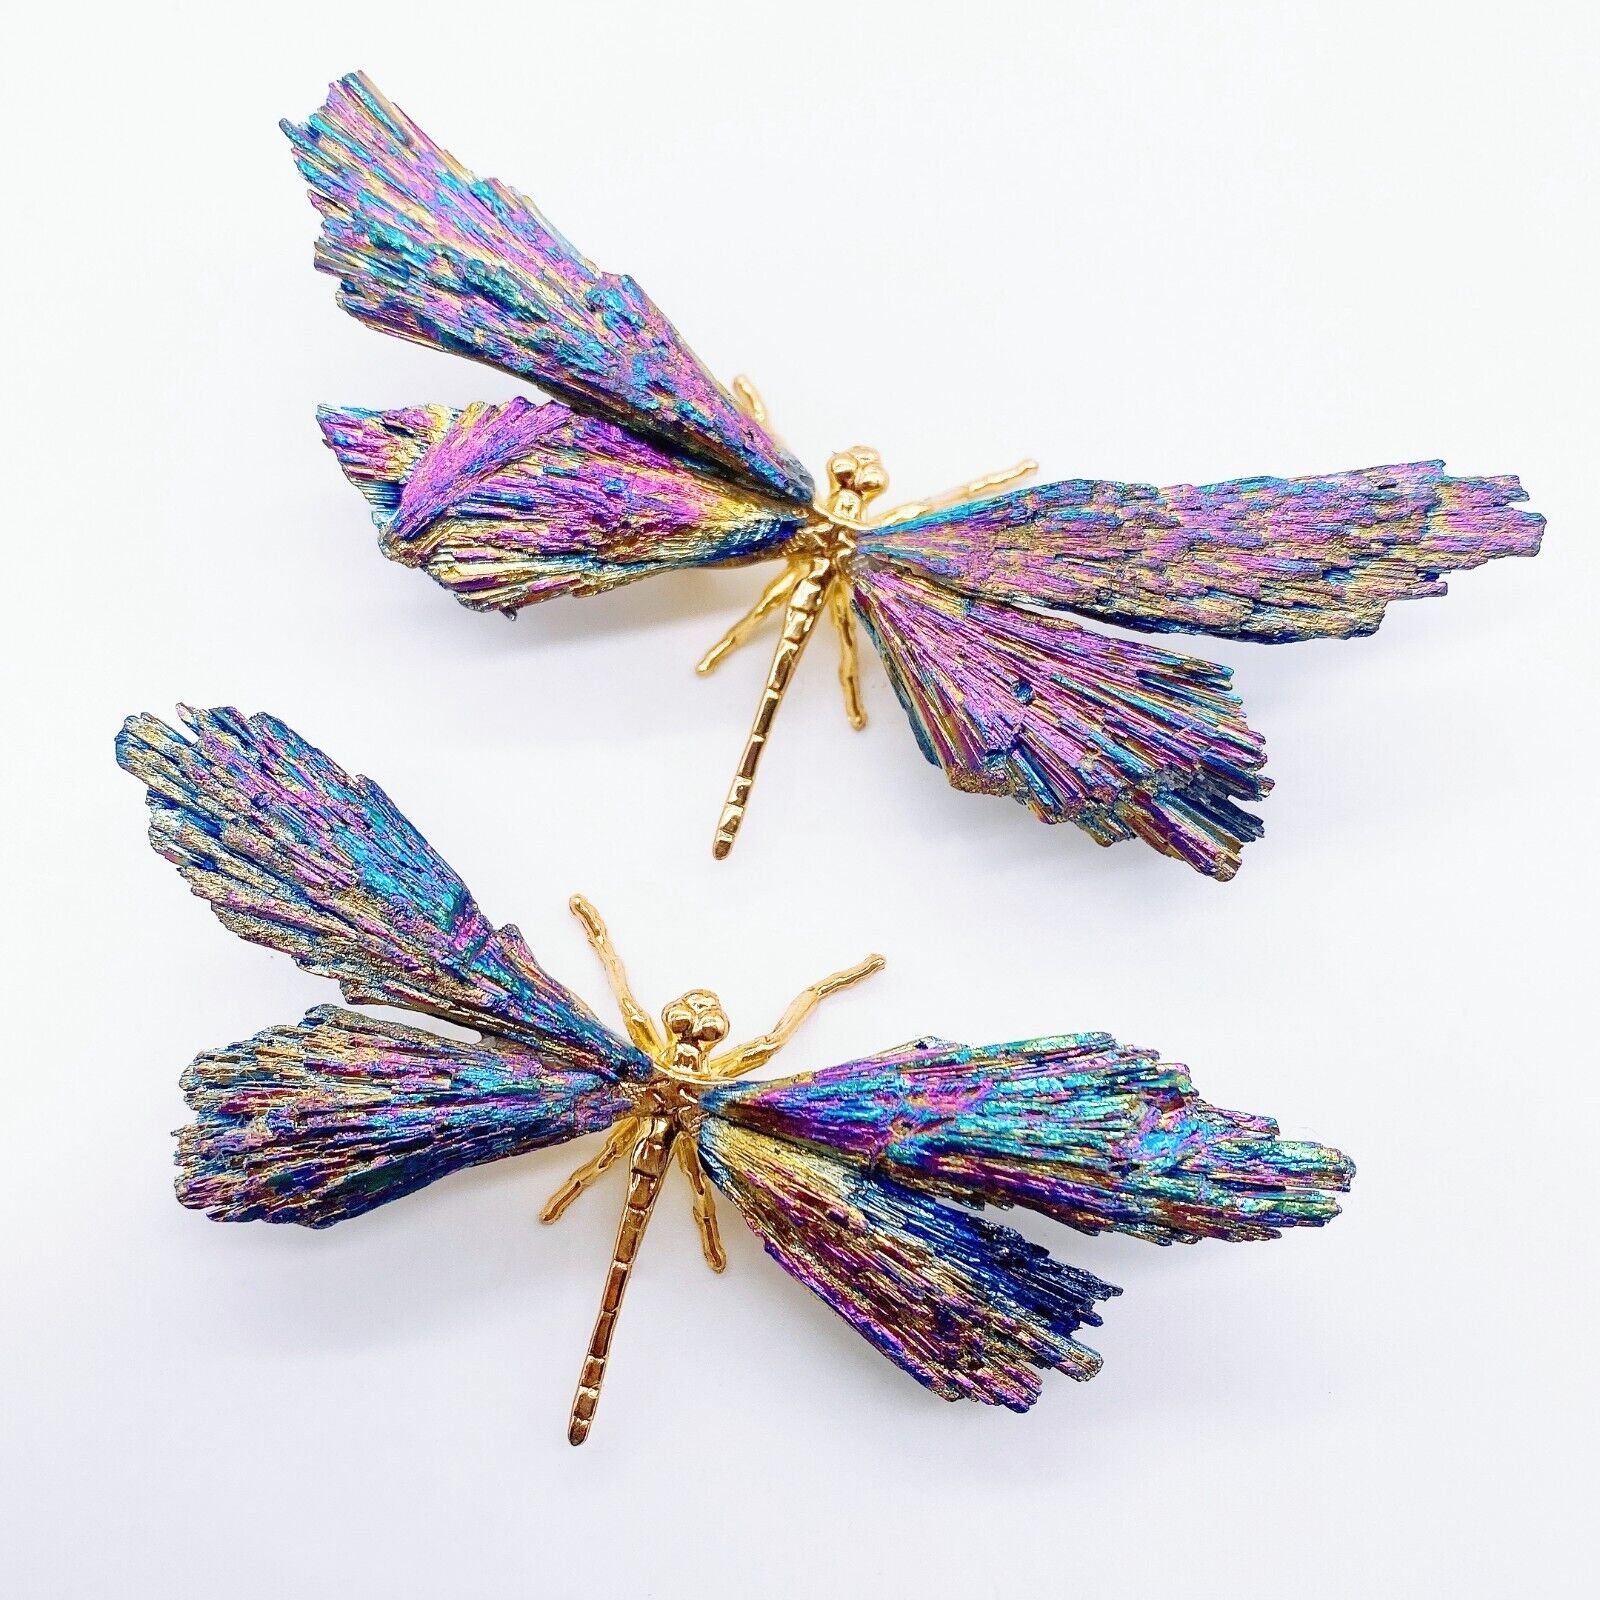 2PCS Natural Colorful Kyanite Dragonfly Crystal Quartz Stone Butterfly Figurine